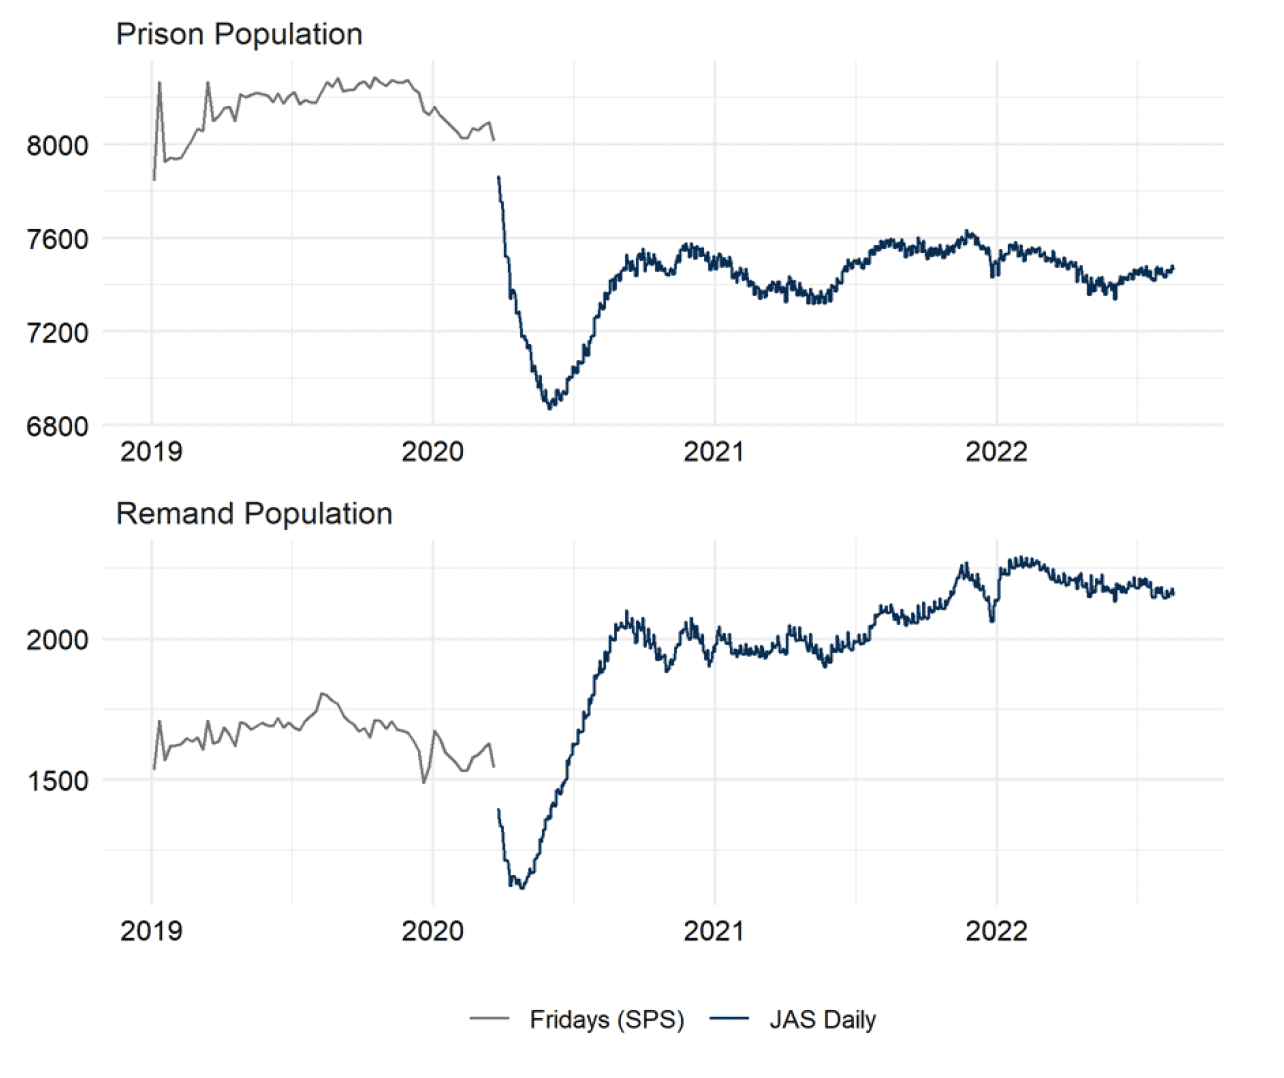 Two line charts showing the Friday prison population overall and the remand population up to April 2020. Thereafter, daily population figures are provided. The trends are described in the body text. Last updated August 2022. Next update due September 2022.